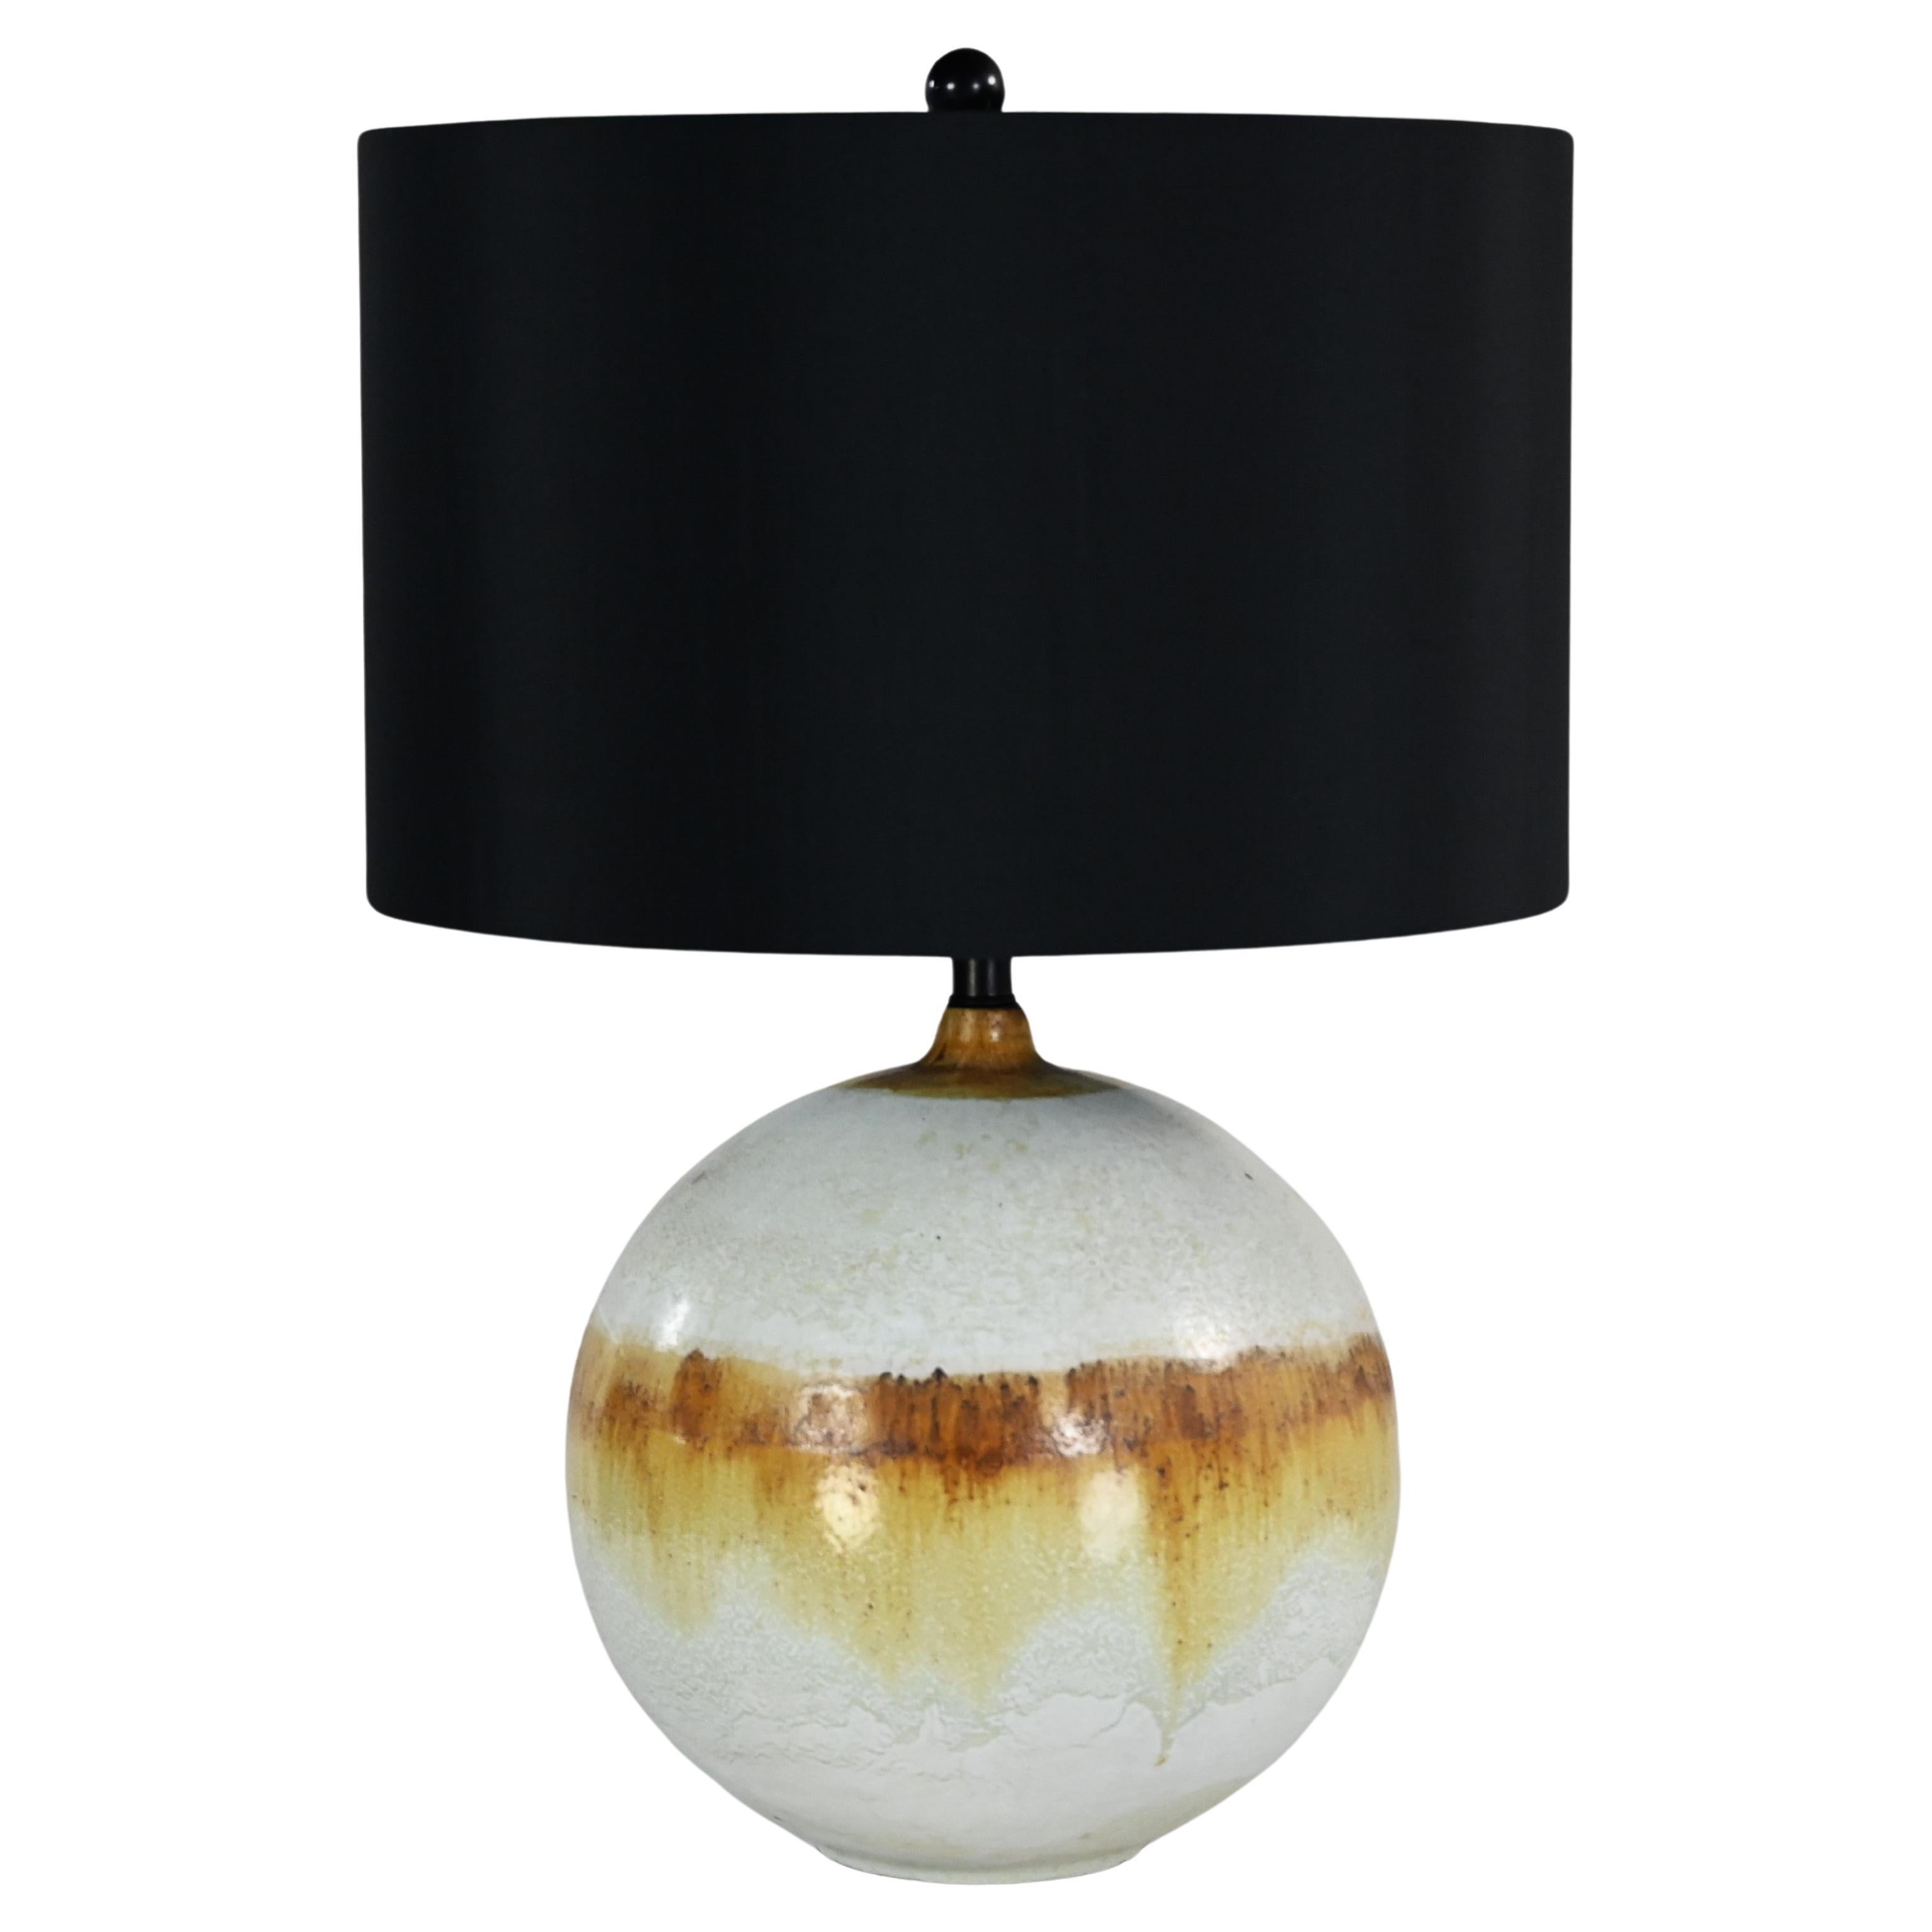 Mid-20th Century MCM Drip Glaze Ceramic Ball Lamp with New Black Shade For Sale